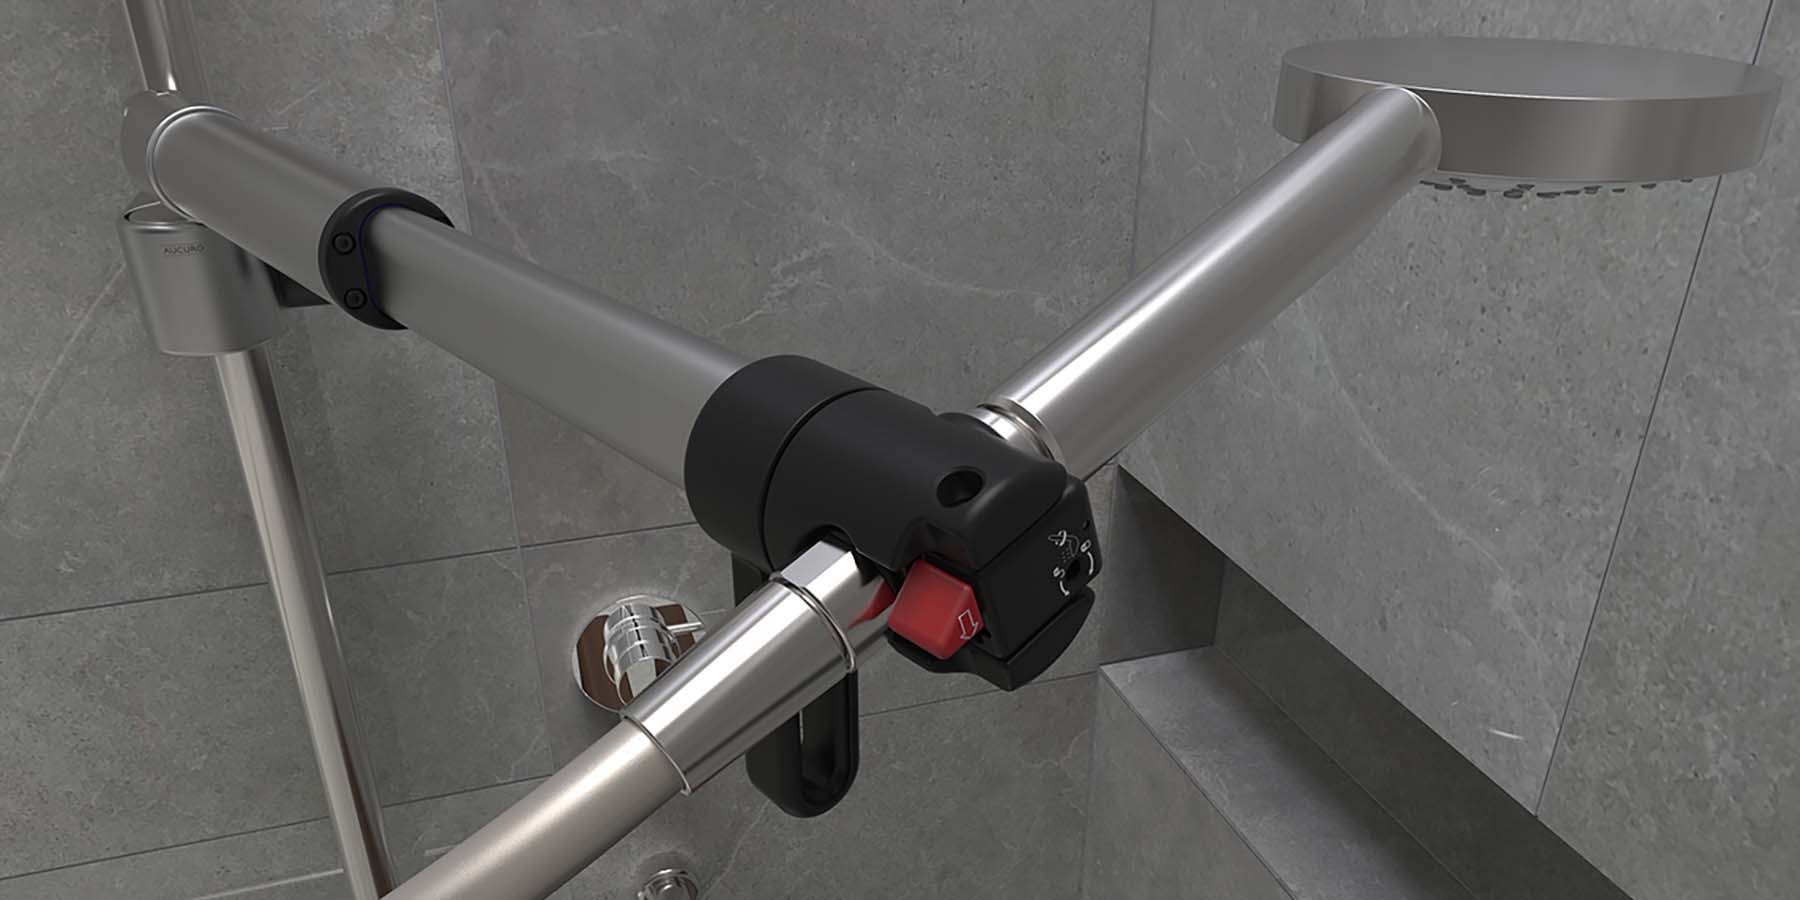 Closeup of the telescopic shower head holder highlighting the red release catch on the safety adapter in a tiled bathroom